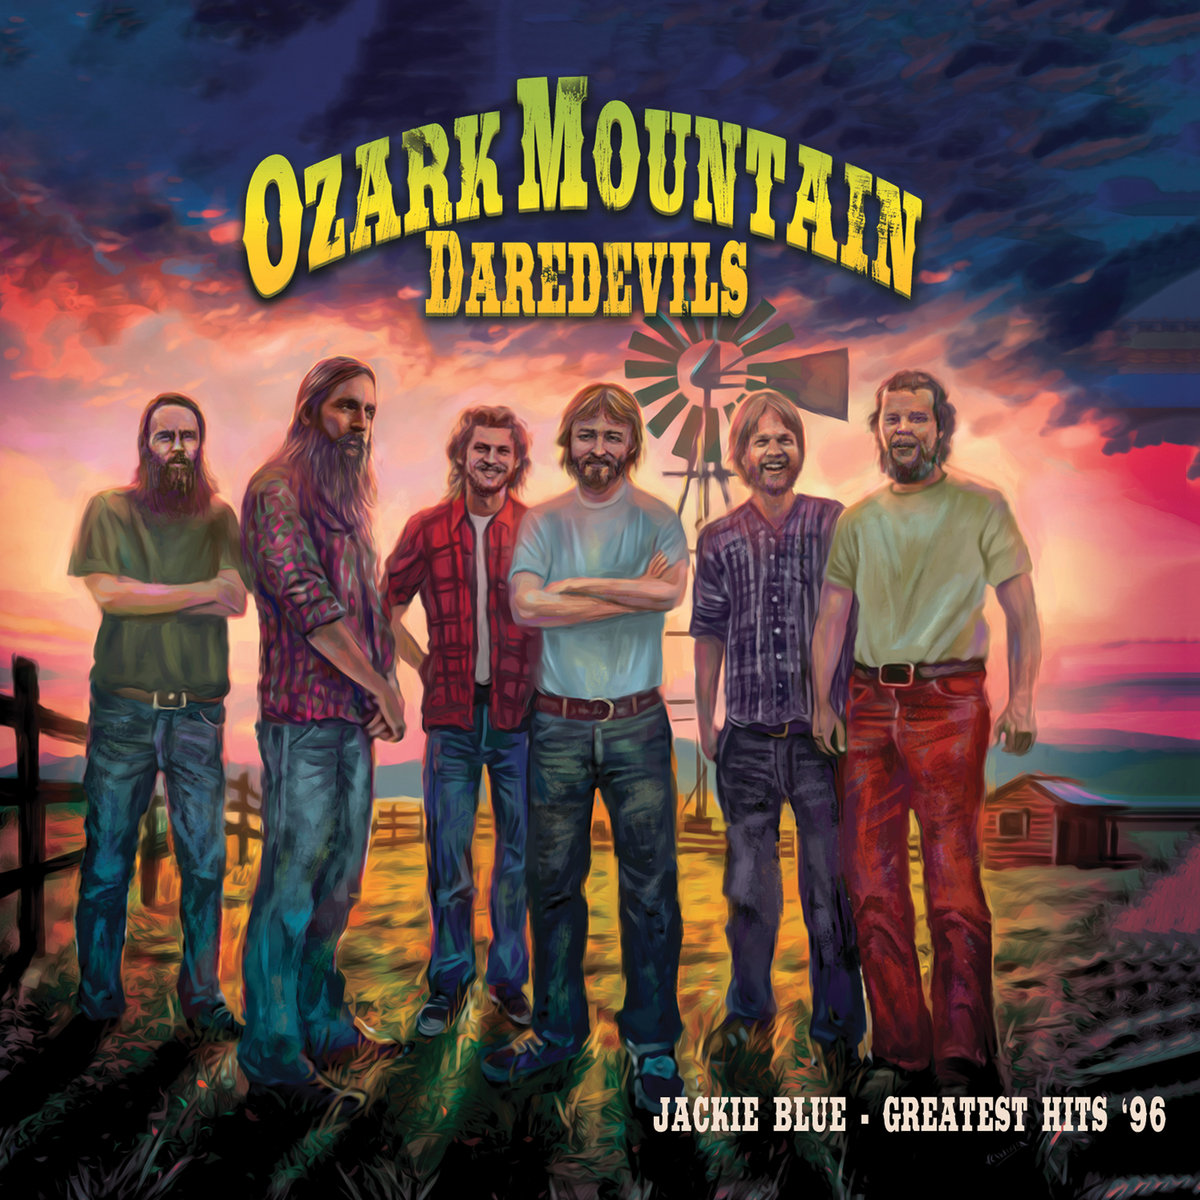 Jackie Blue - Greatest Hits '96 | The Ozark Mountain Daredevils